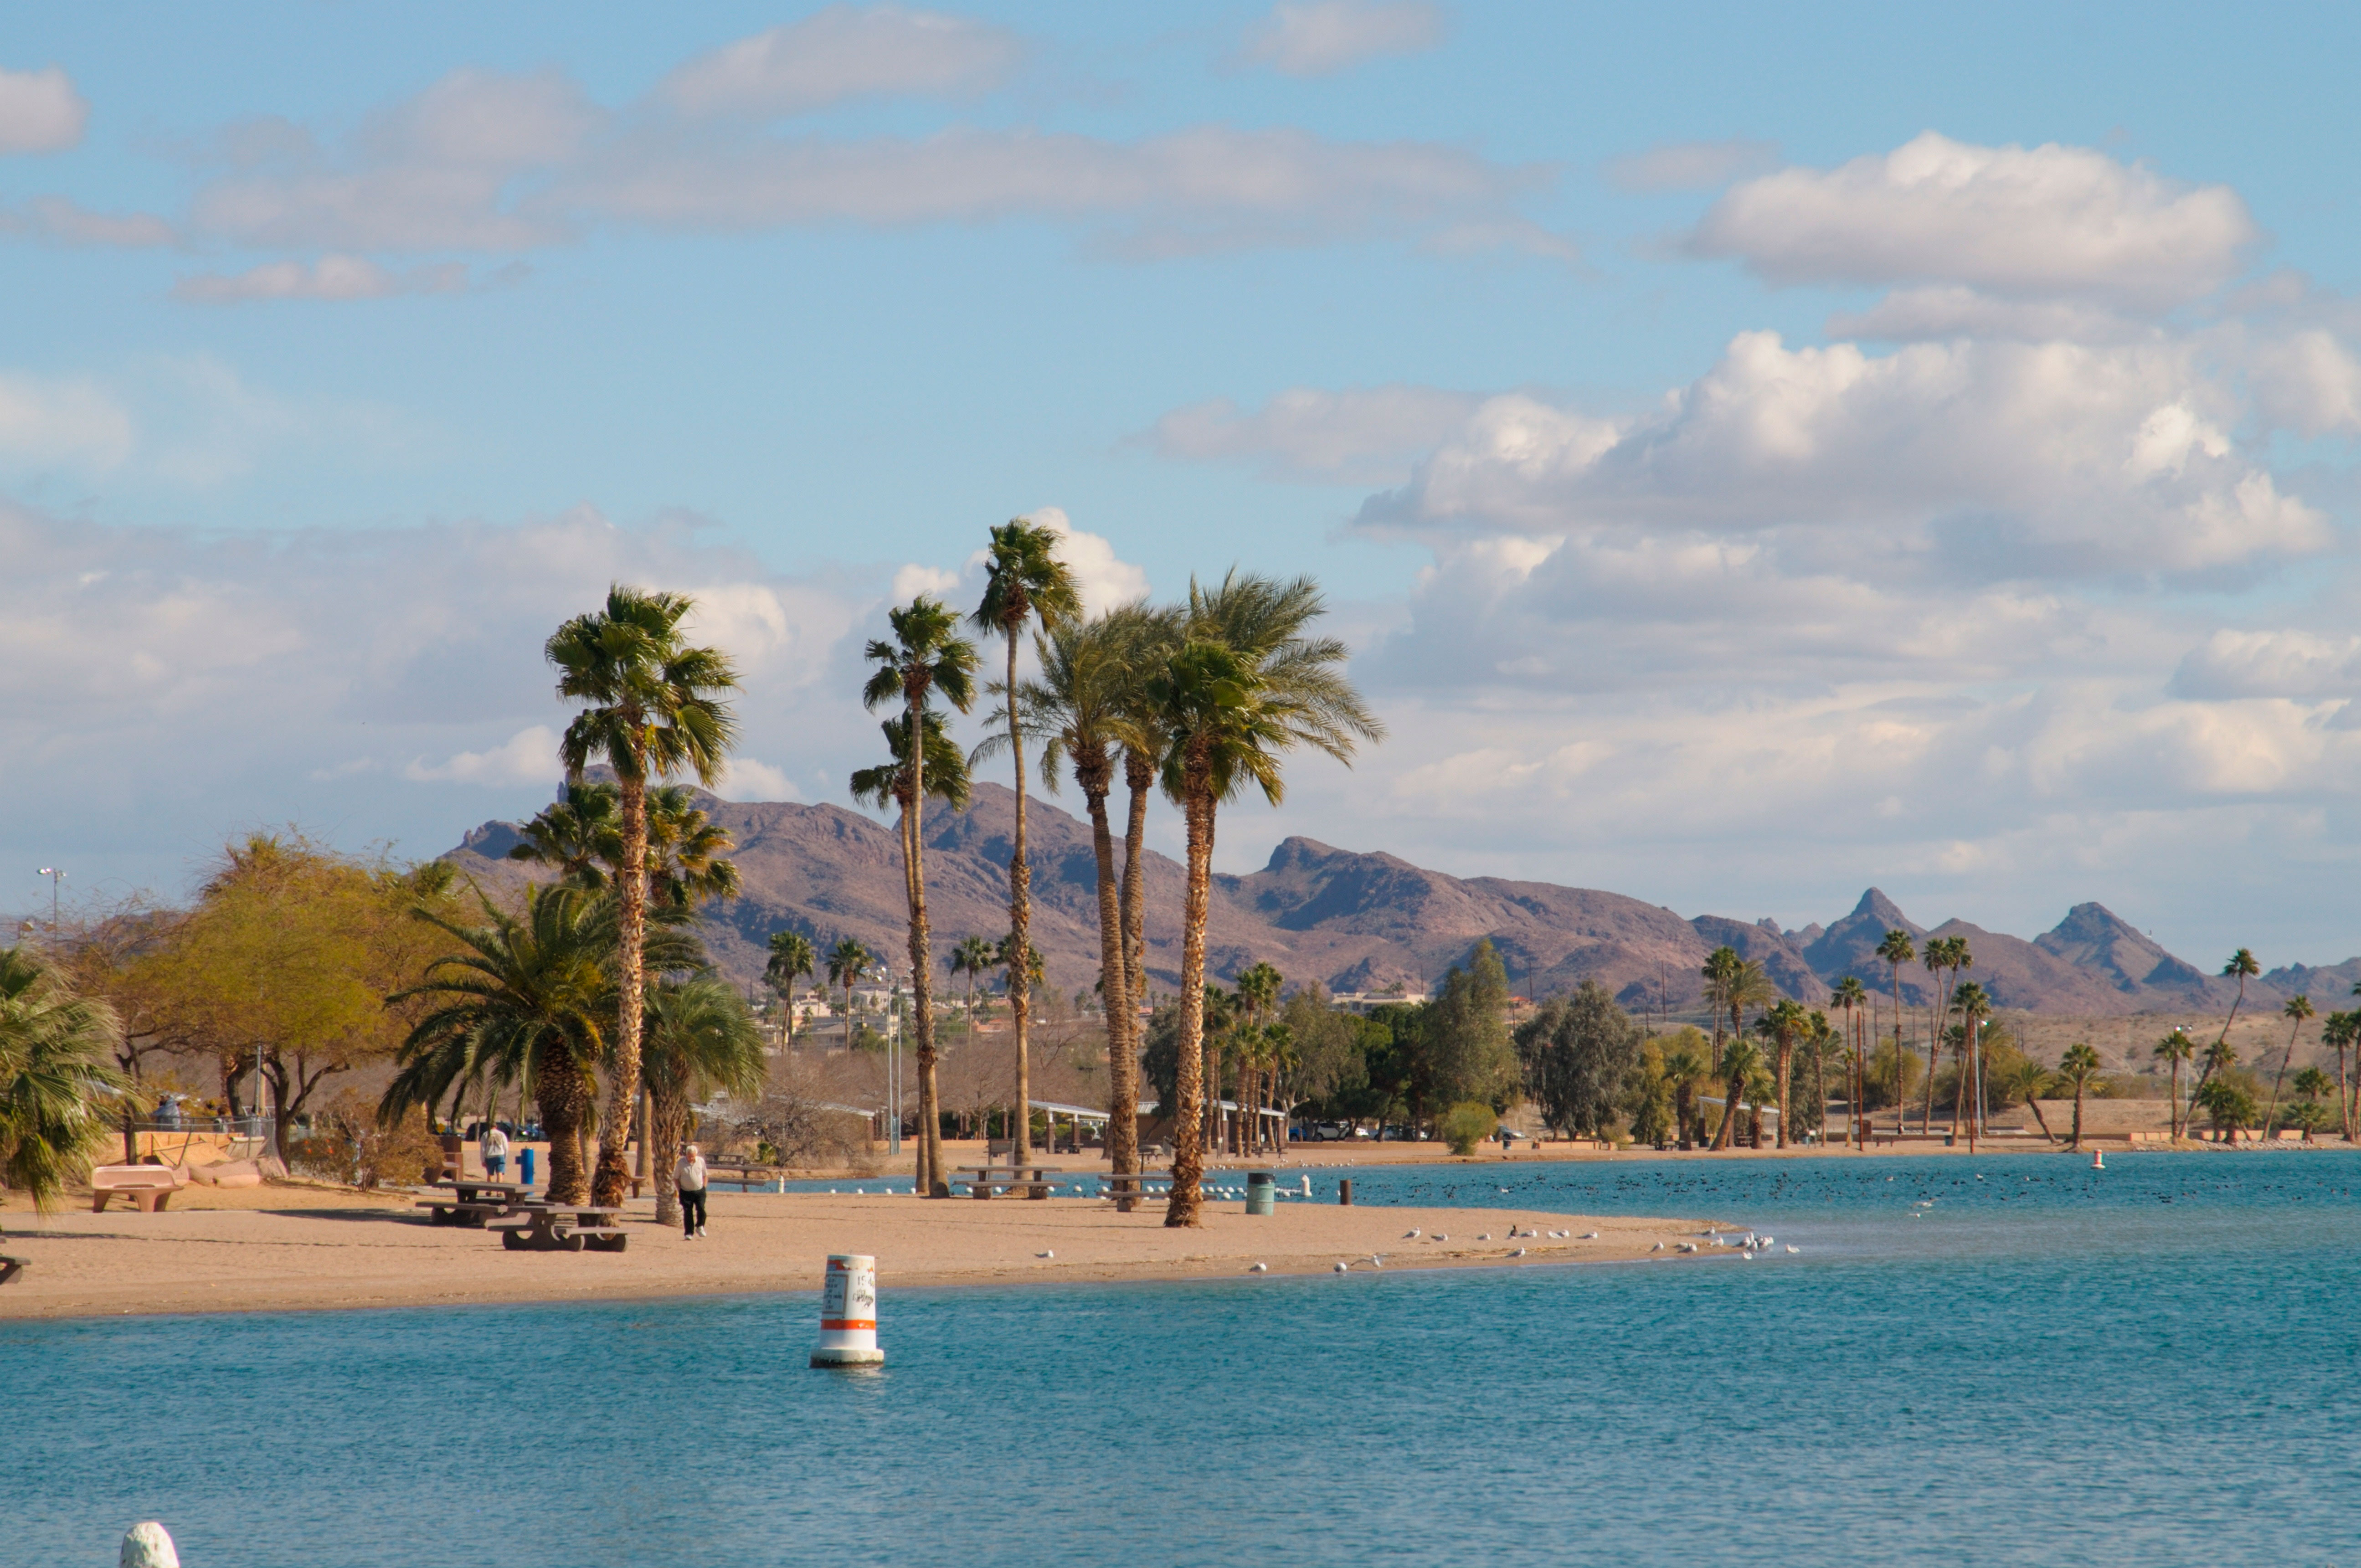 In spring the banks of Lake Havasu become party-central for boating revelers. Image by Robert Harding Productions / Robert Harding World Imagery / Getty